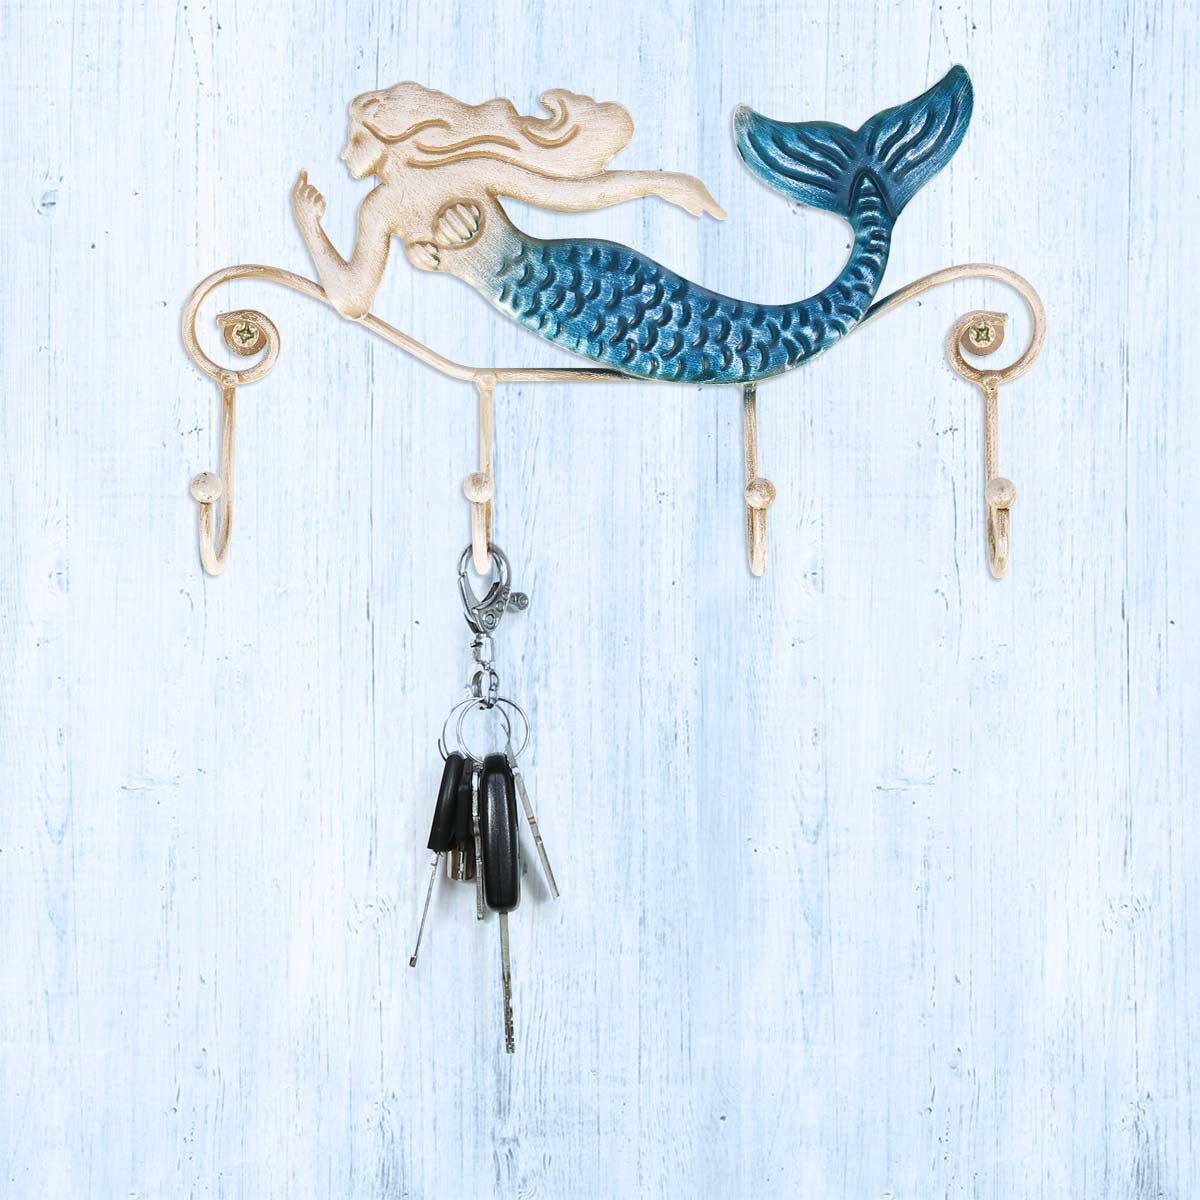 A Mermaid Retro Living Room Wall Hook with keys hanging on a hook from Maramalive™.